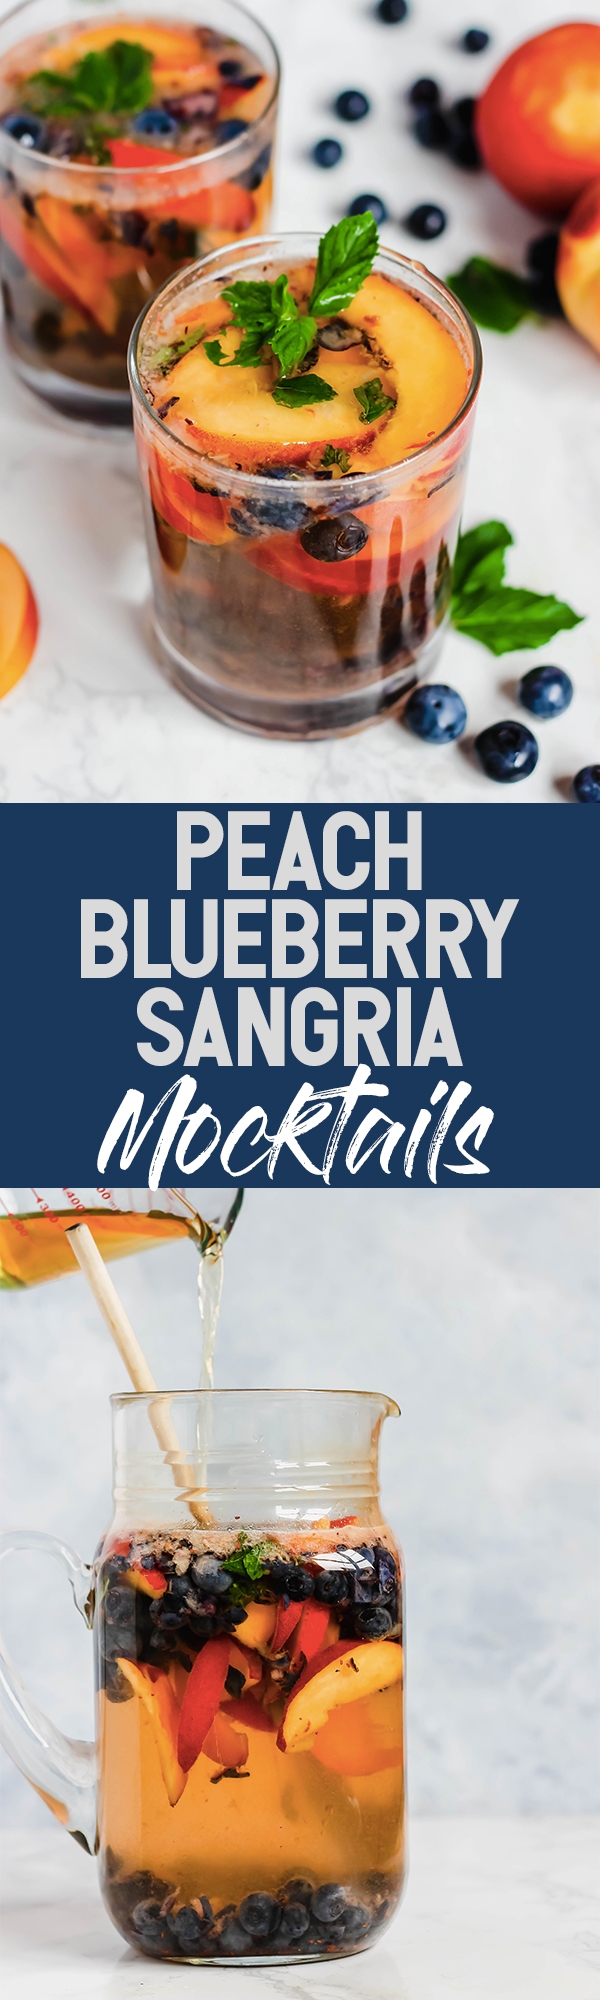 These Peach Blueberry Sangria Mocktails are packed with seasonal summer fruit for refreshing, non-alcoholic drinks for all ages to enjoy! They’re infused with fresh mint and apple cider vinegar for extra flavor.